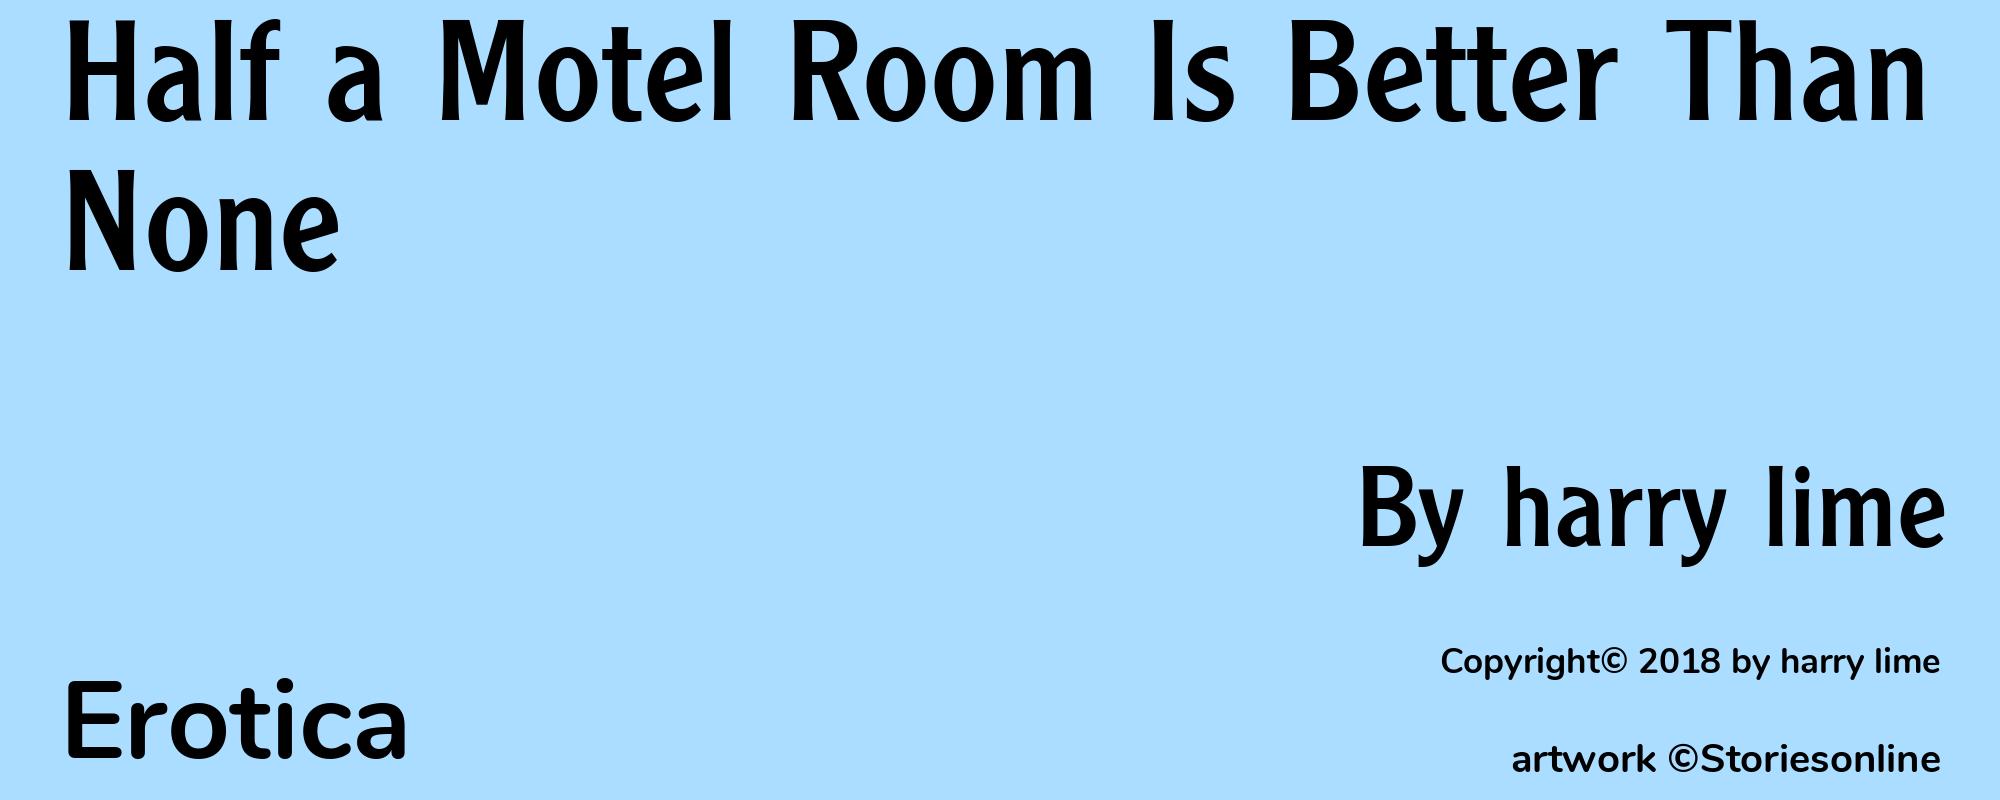 Half a Motel Room Is Better Than None - Cover